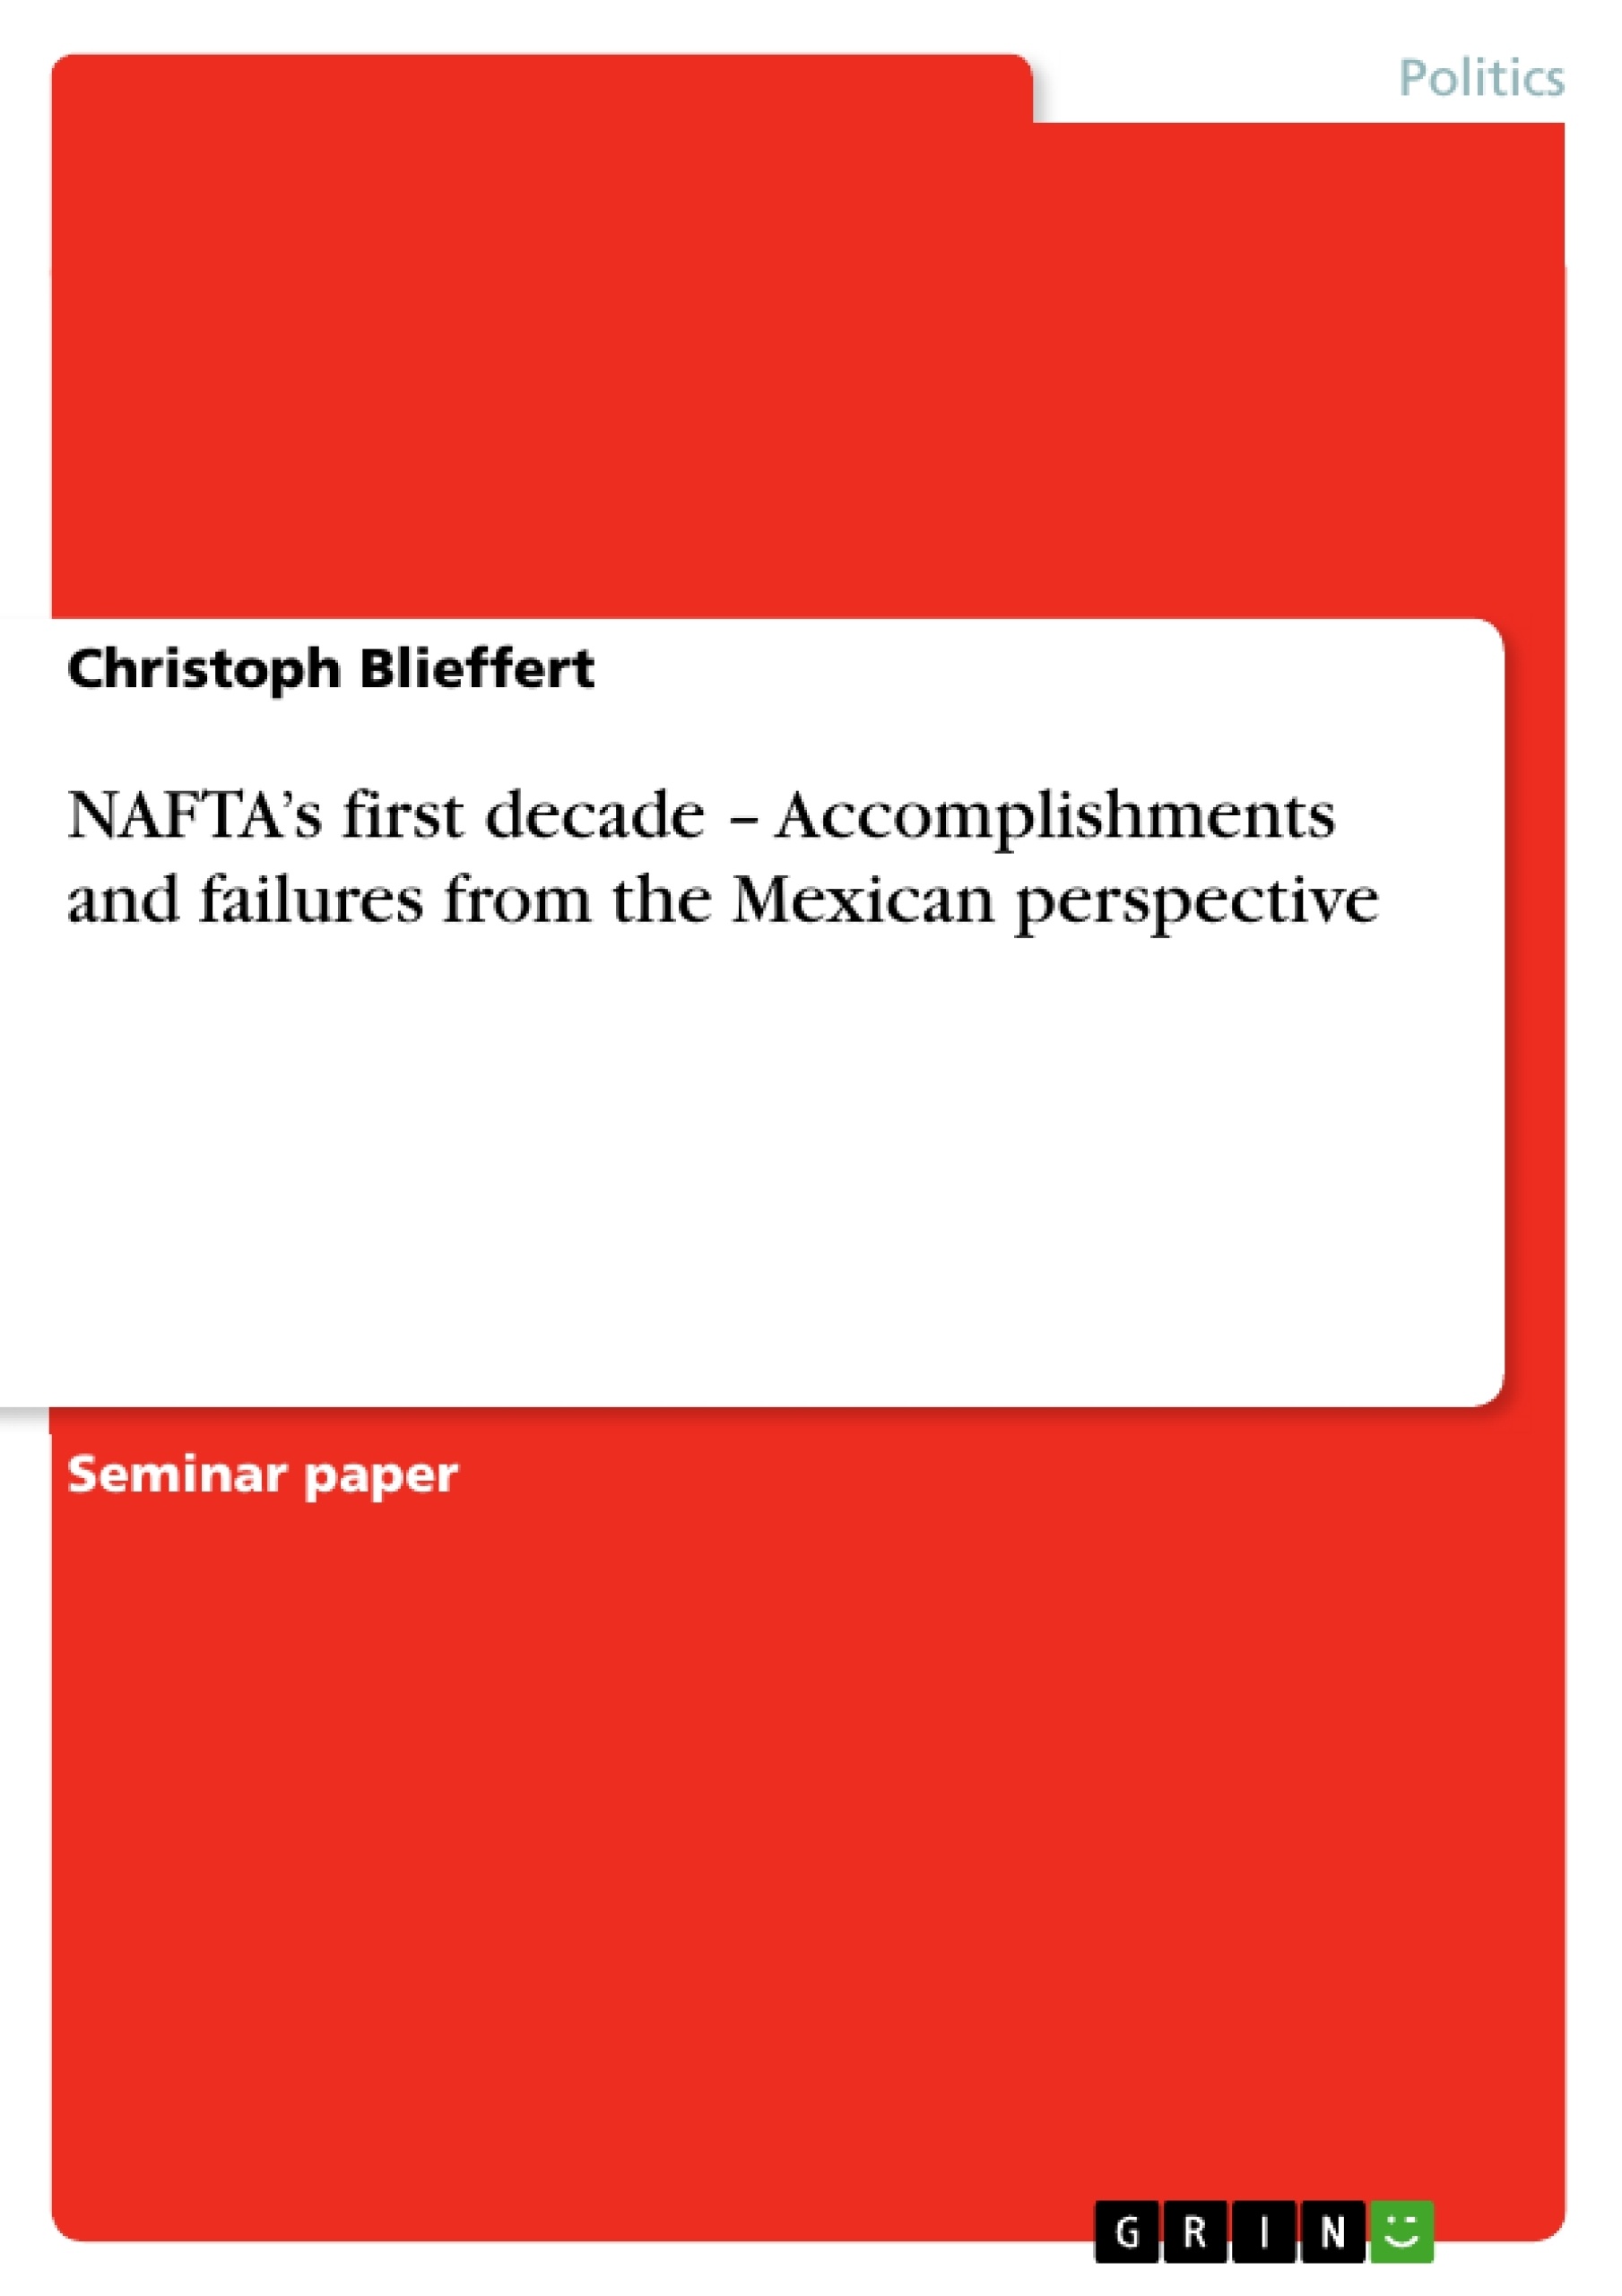 Title: NAFTA’s first decade – Accomplishments and failures from the Mexican perspective